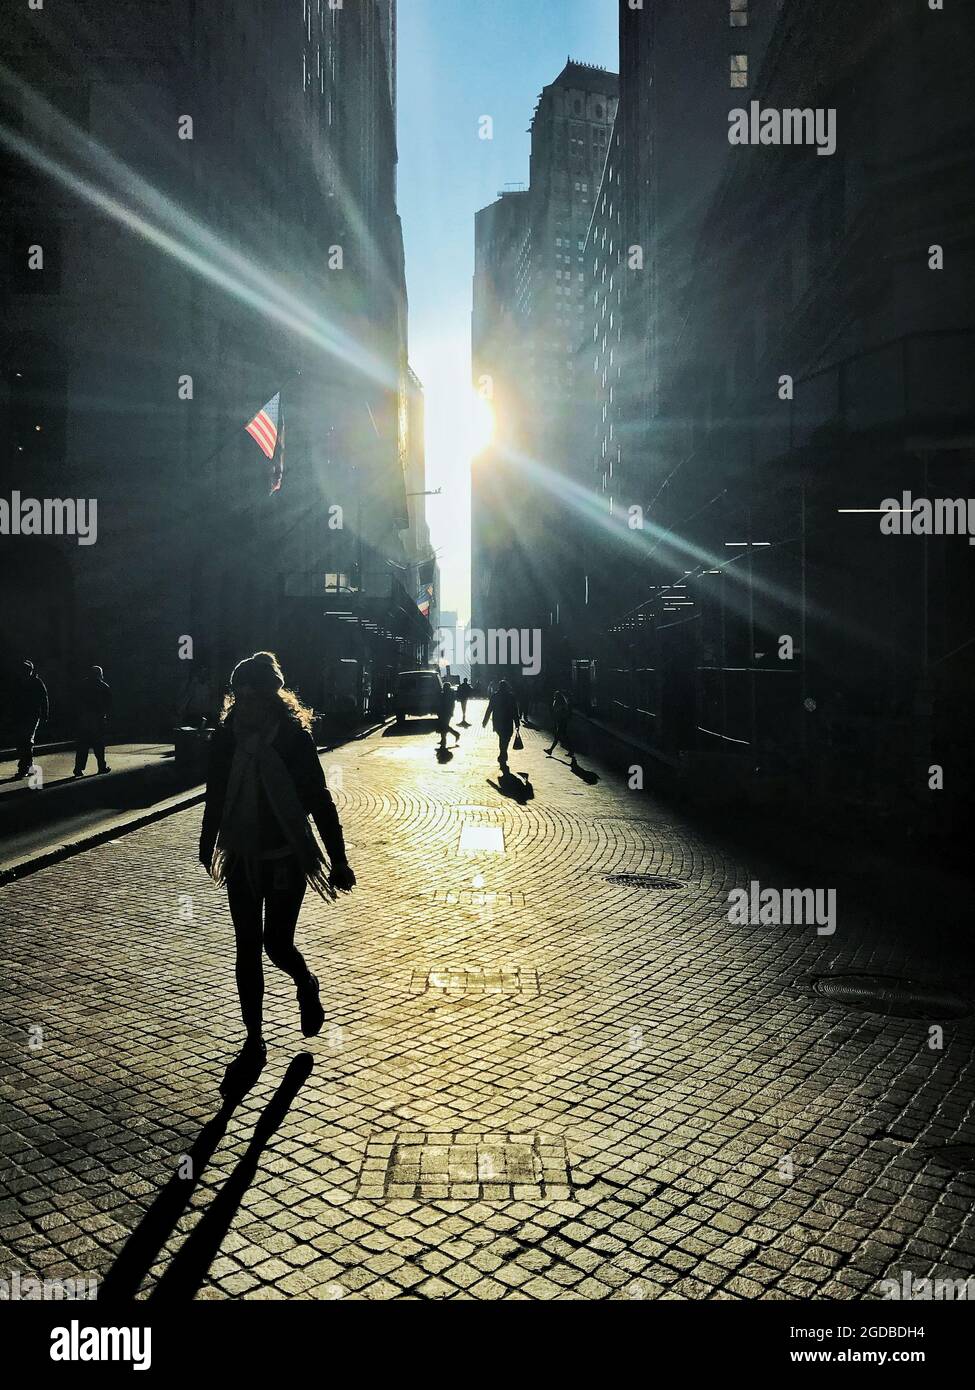 Silouette of people on a cobblestone street in lower Manahattan near the New York Stock Exchange. Stock Photo